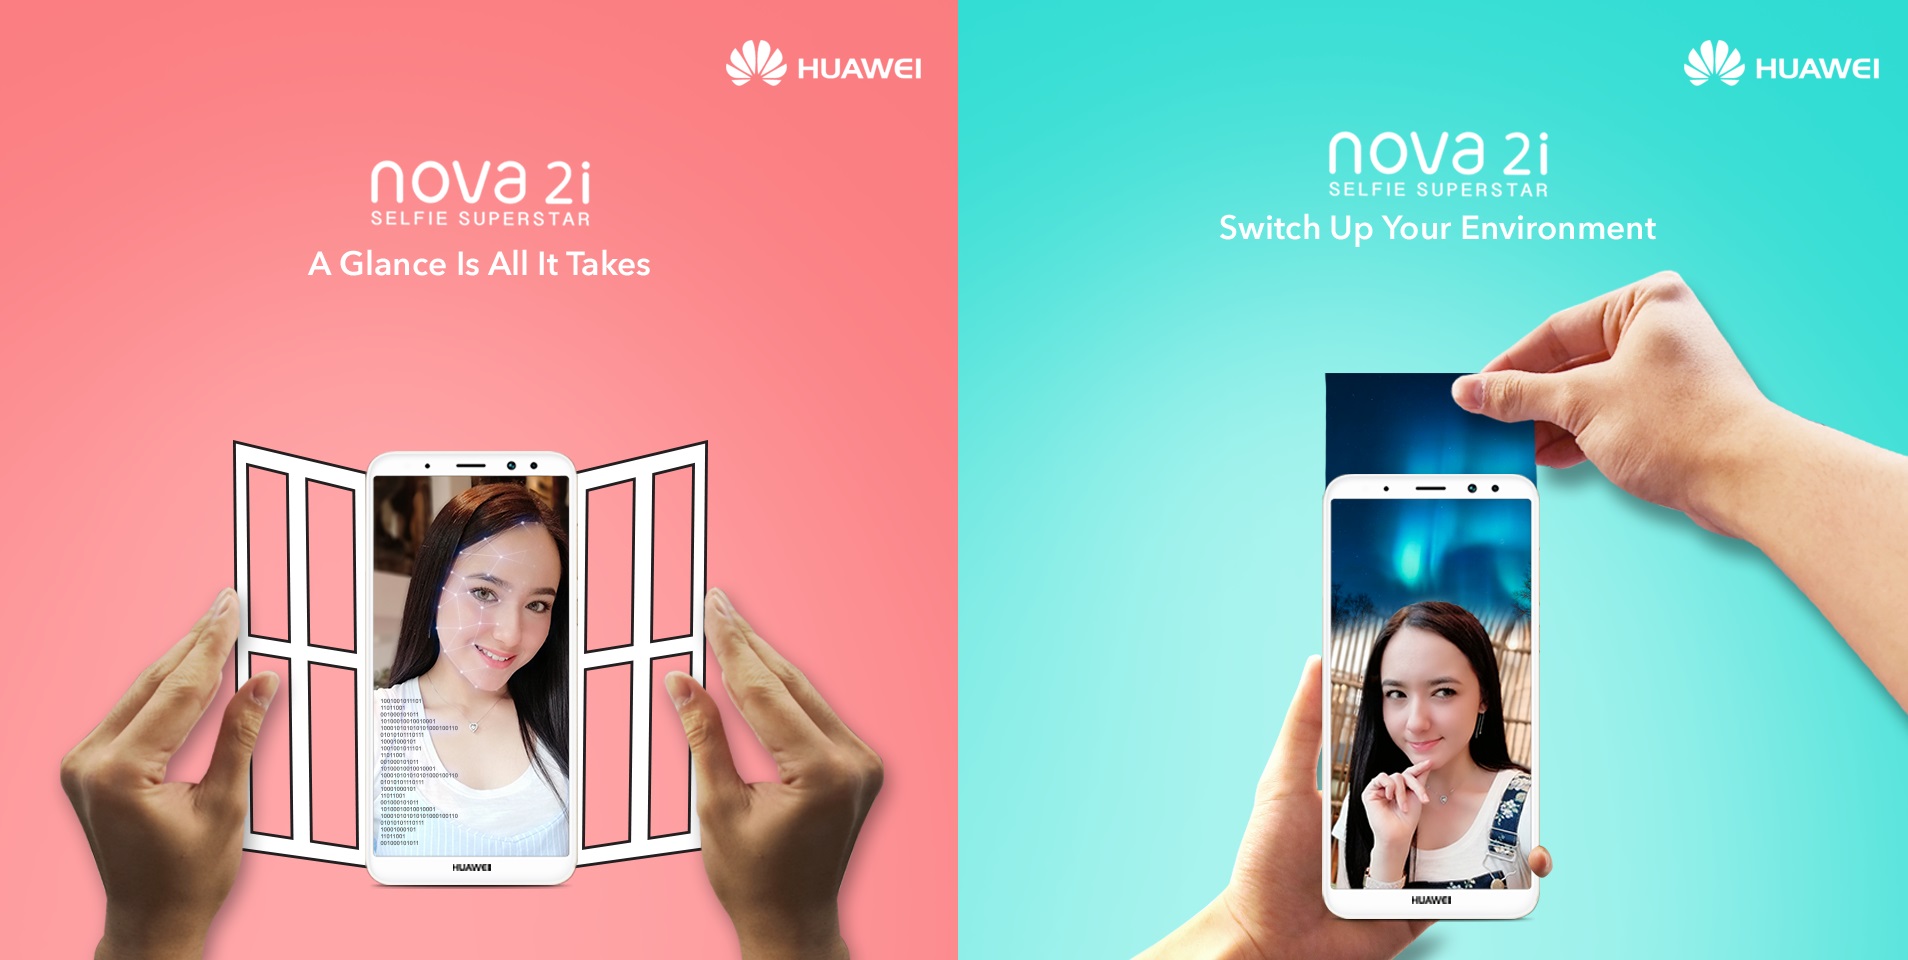 Face Unlock and AR Lens feature coming soon to Huawei Nova 2i